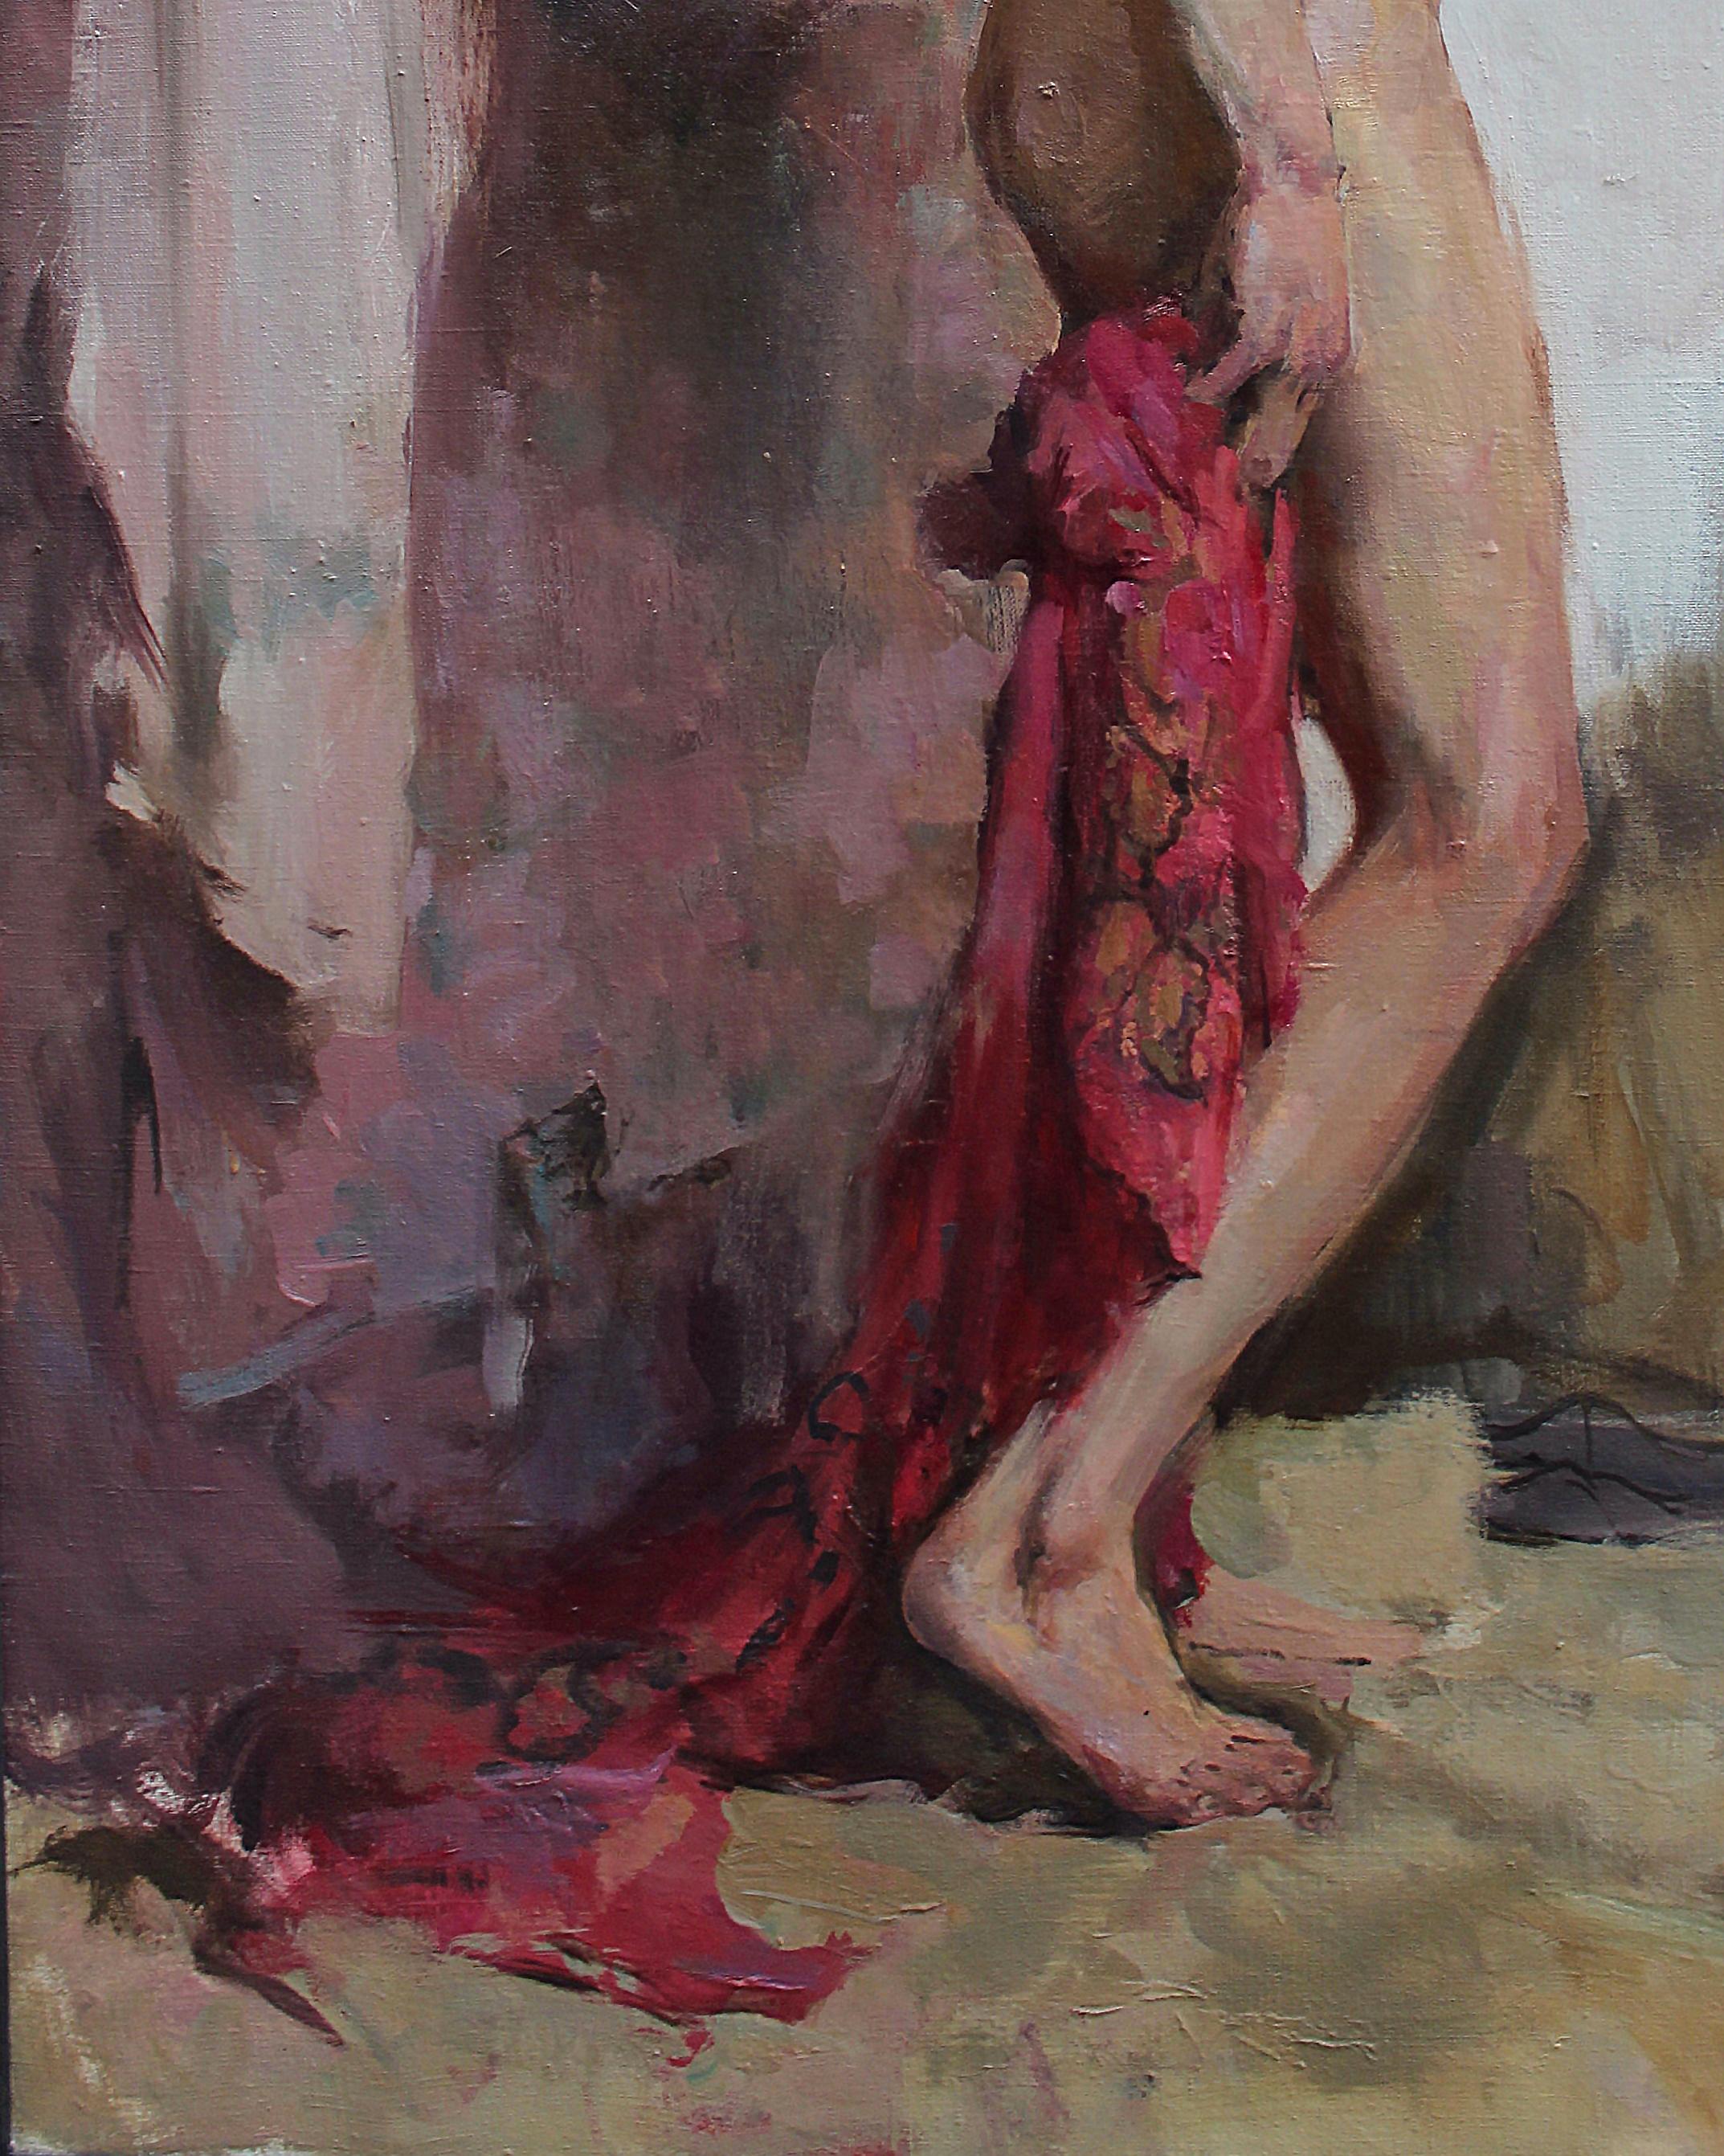 Nude on Rose - 21st Century Contemporary Female Beauty Oil Painting - Gray Figurative Painting by Andrew Piankovski